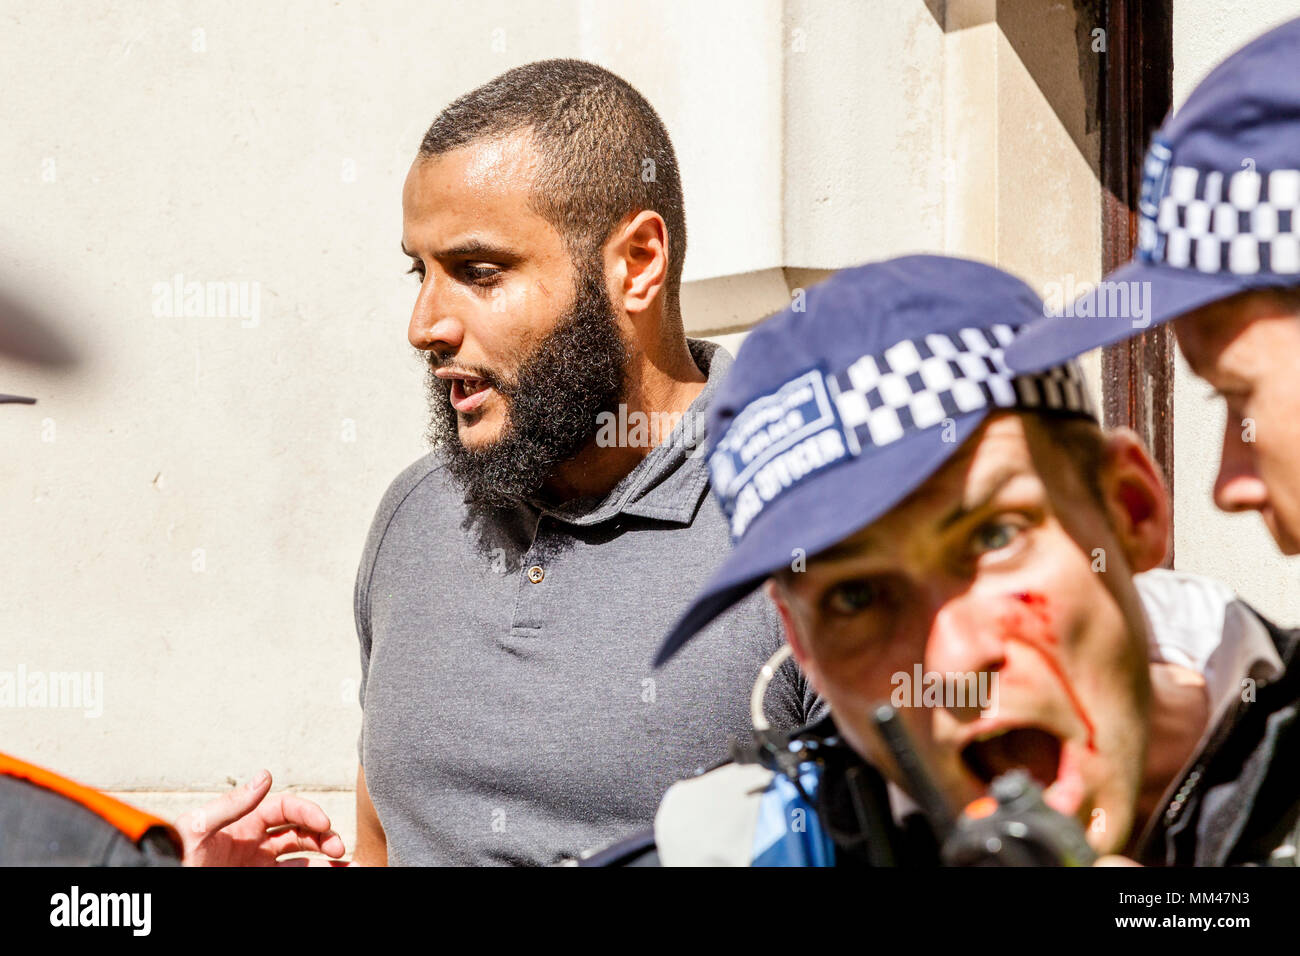 An injured Metropolitan Police Officer escorts prominent Muslim speaker Muhammed Hijab away from a freedom of speech rally, London, UK Stock Photo